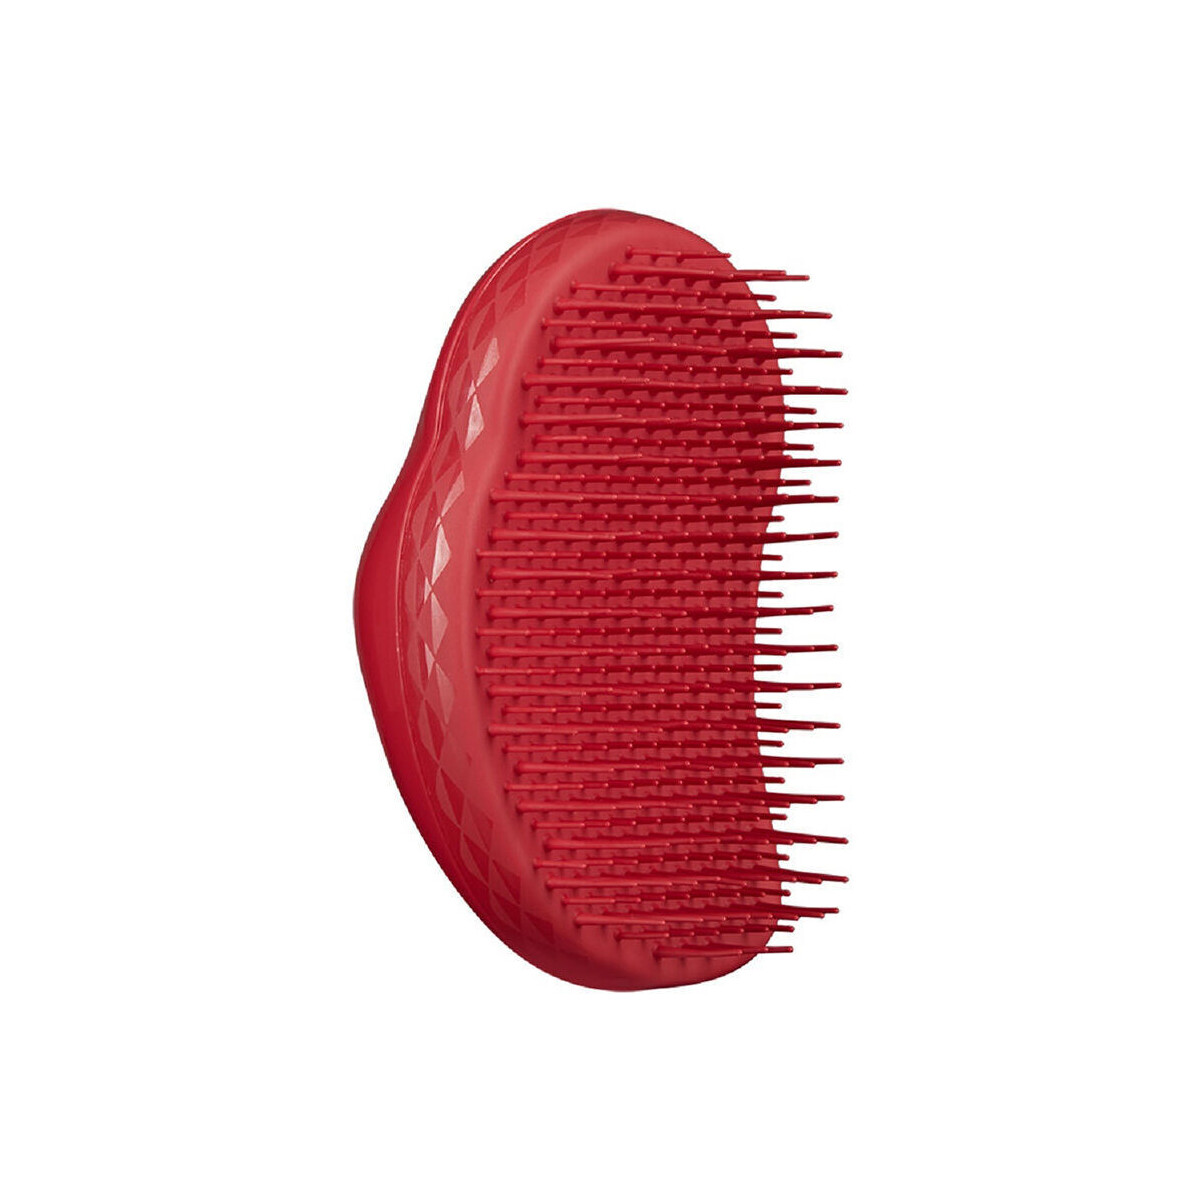 Beauty Accessoires Haare Tangle Teezer Thick & Curly salsa Red 